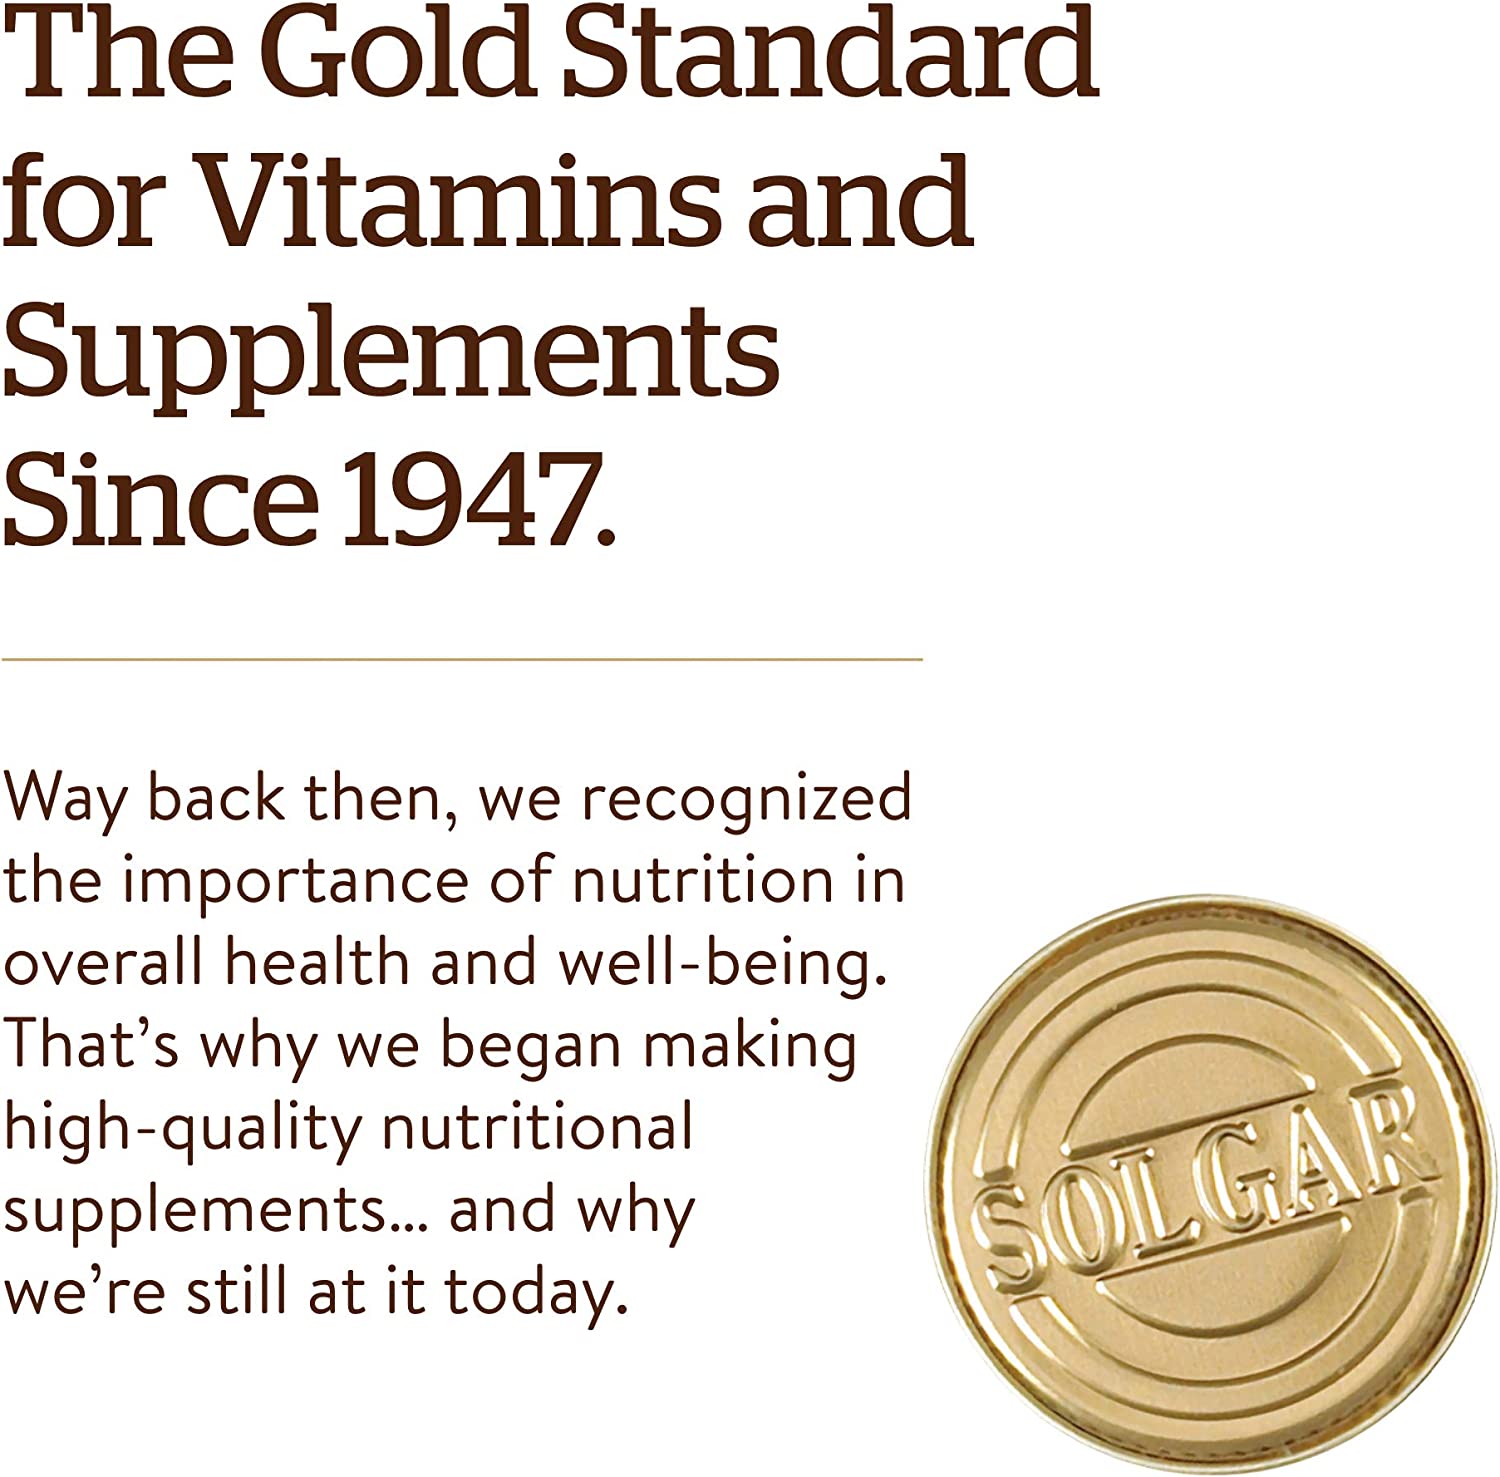 the gold standard for vitamins and supplements ester c since 1947